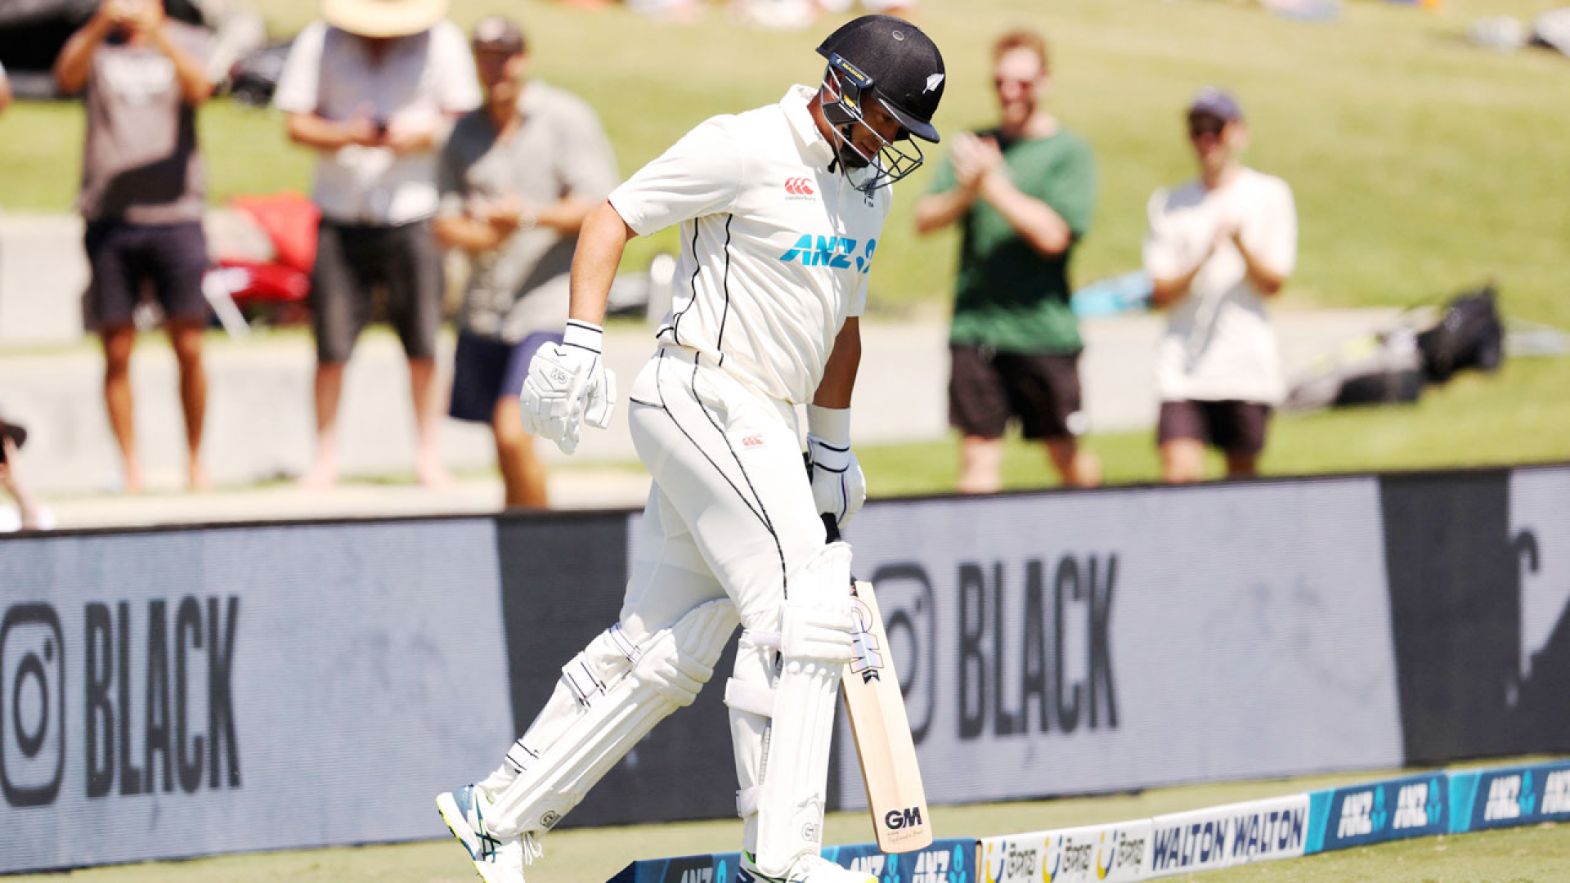 NZ vs BAN | Ross Taylor wants to finish his Test career with win in front of family and friends